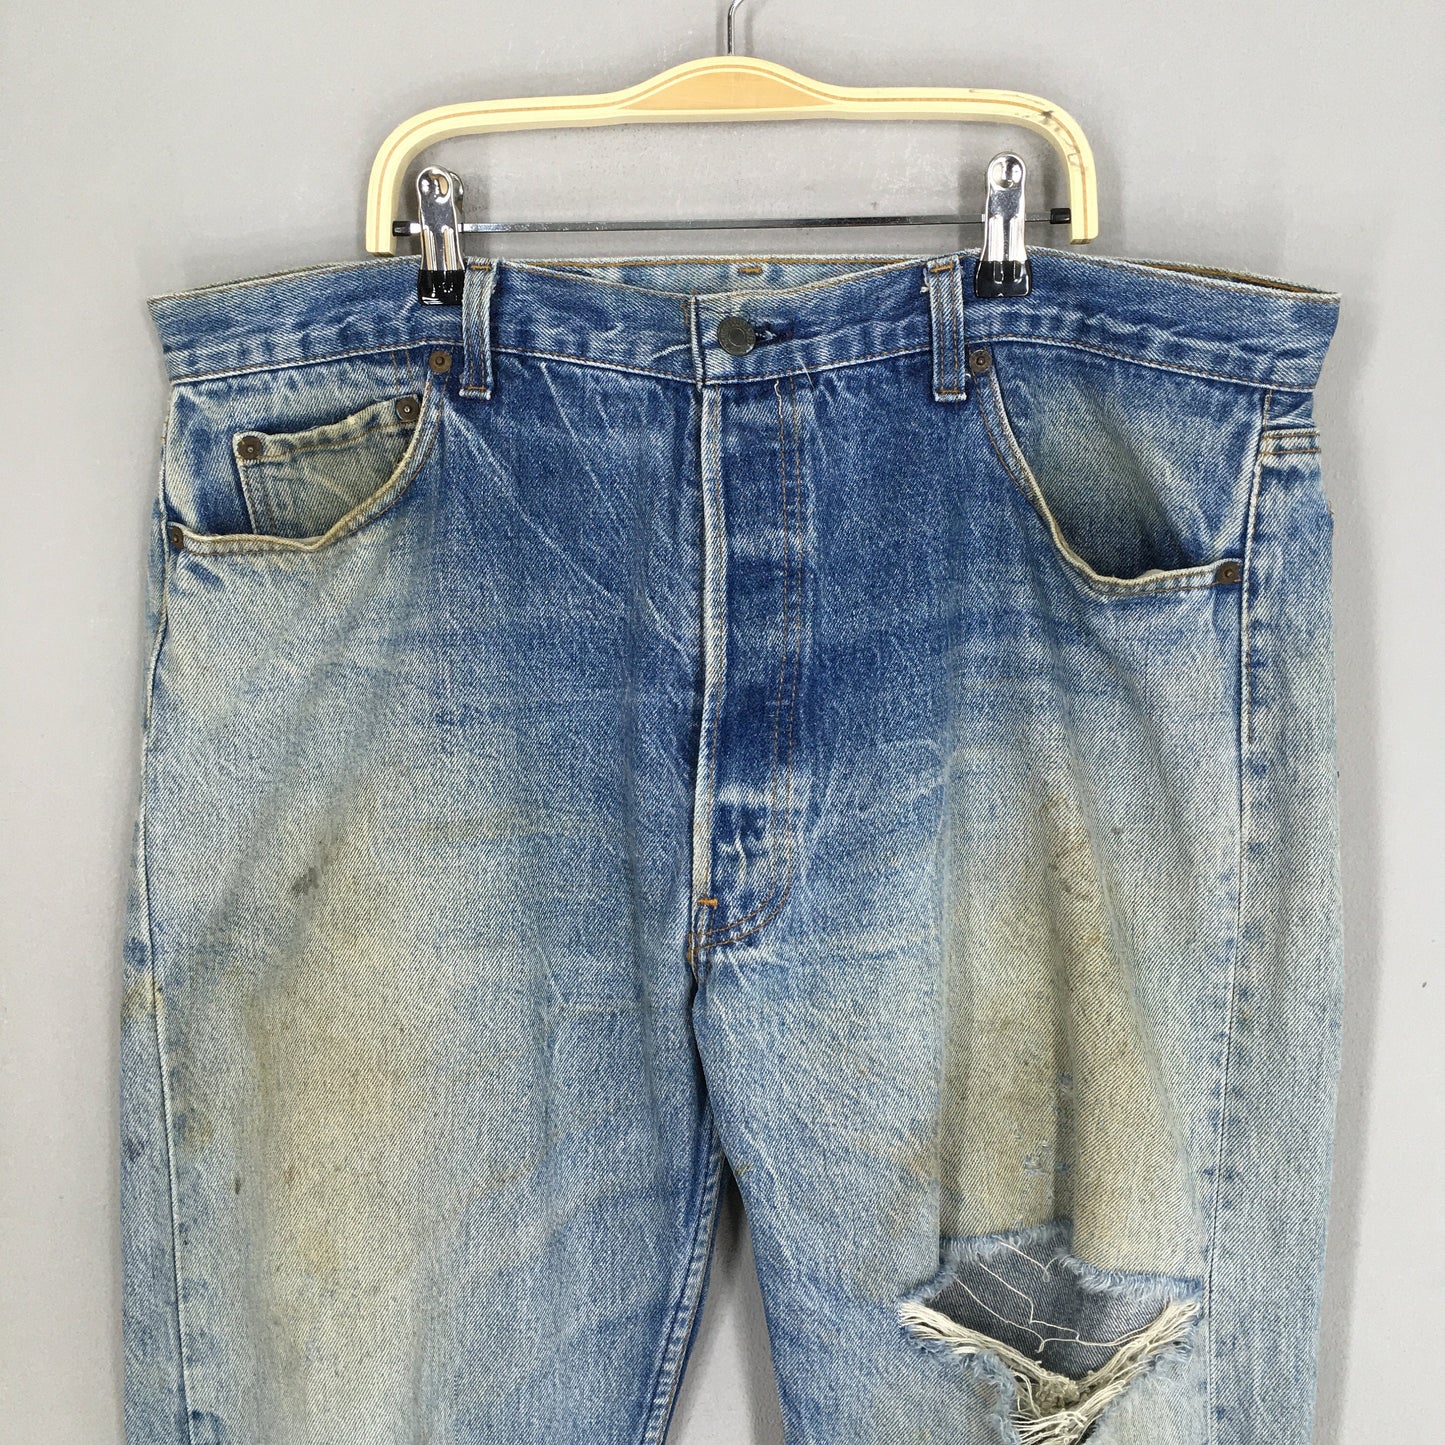 Levi's 501 Distressed Ripped Stonewash Jeans Size 37x28.5